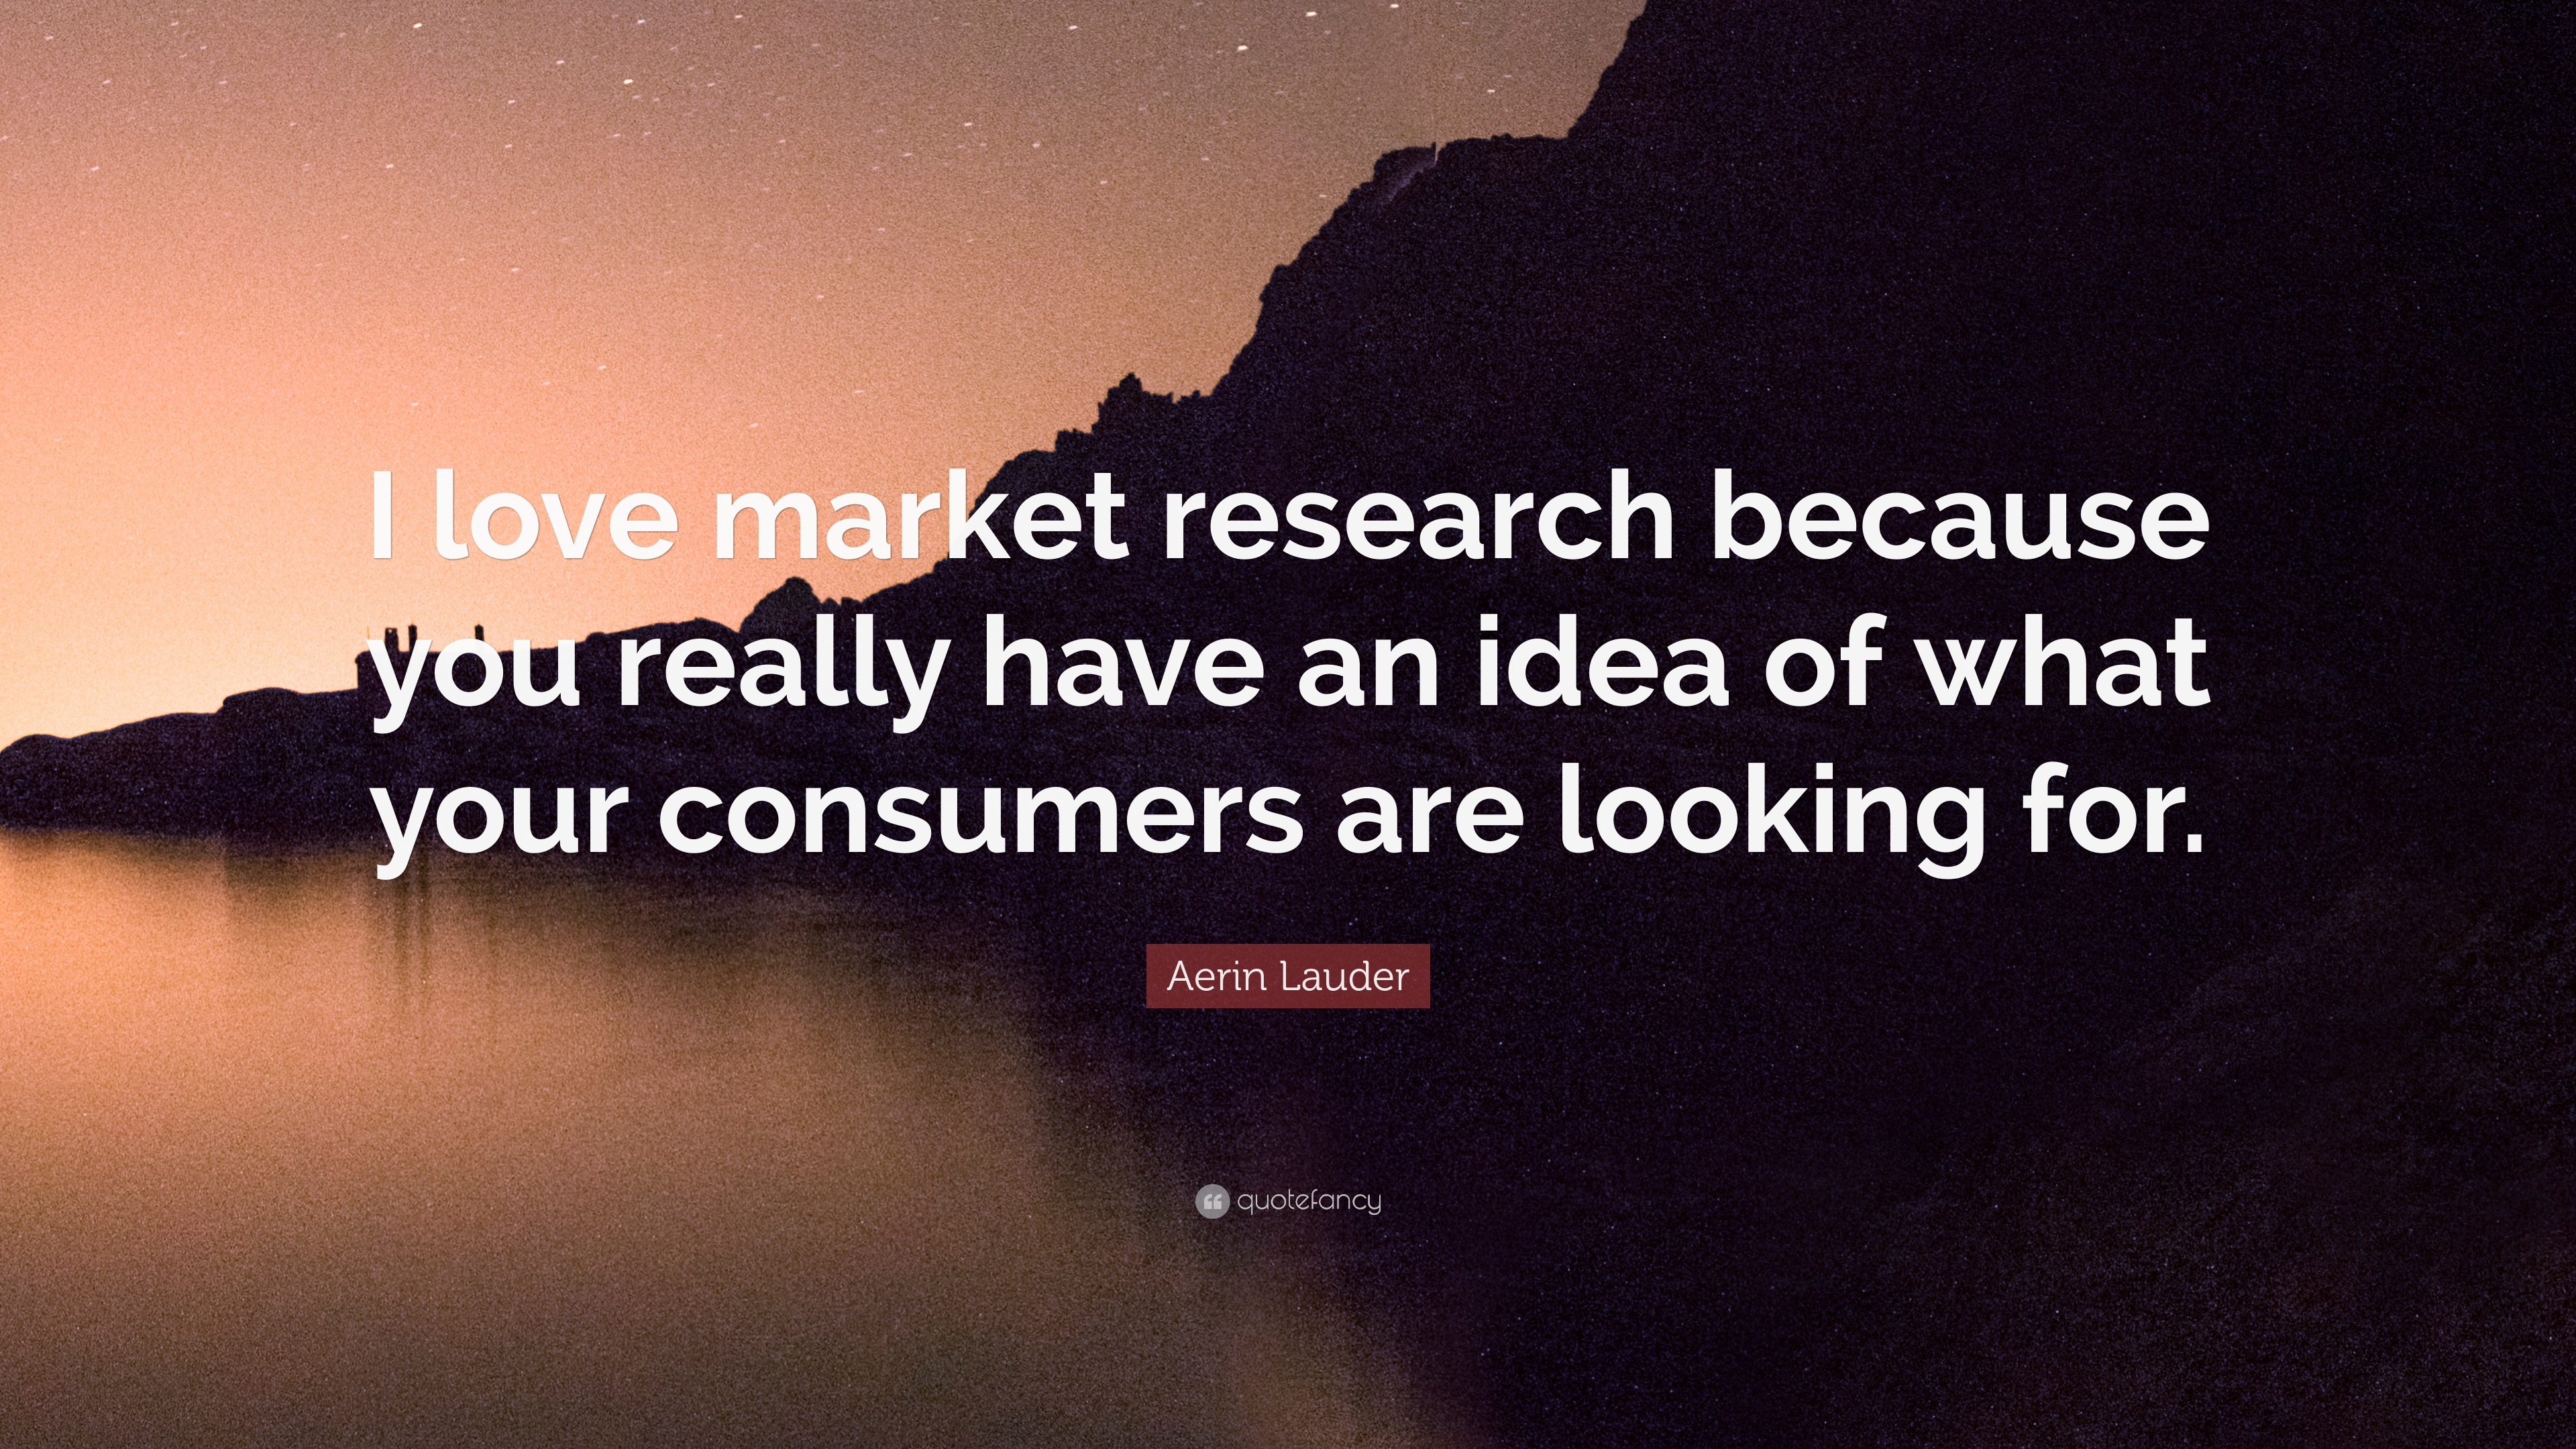 what is a market research quote